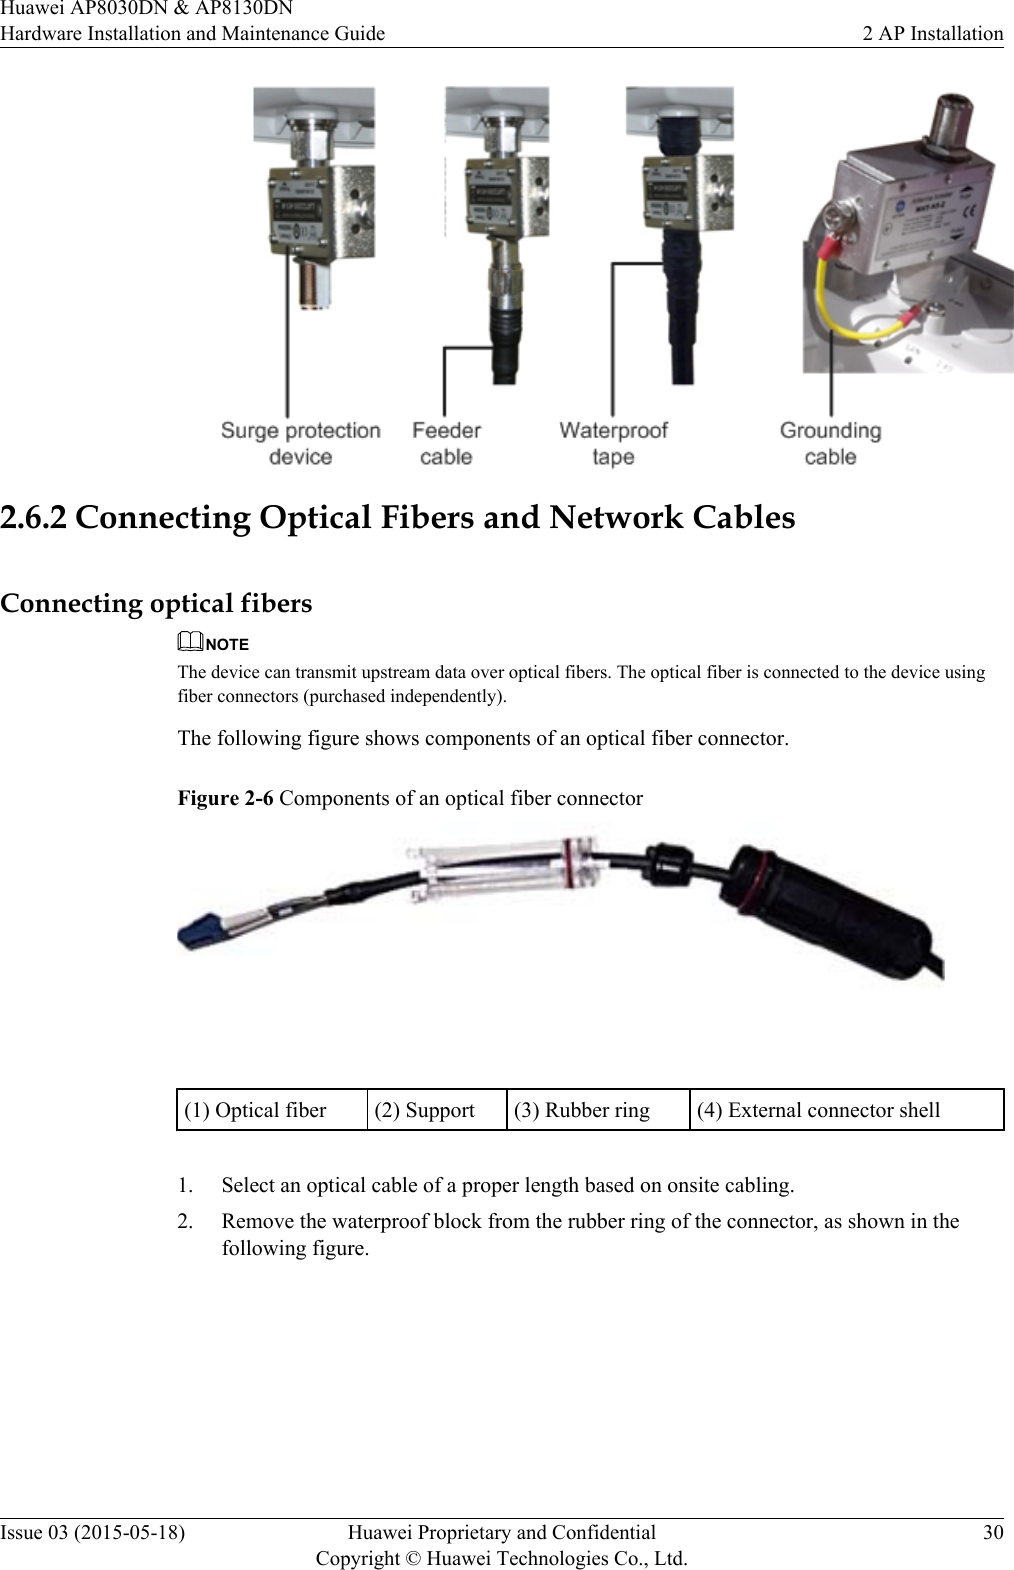 2.6.2 Connecting Optical Fibers and Network CablesConnecting optical fibersNOTEThe device can transmit upstream data over optical fibers. The optical fiber is connected to the device usingfiber connectors (purchased independently).The following figure shows components of an optical fiber connector.Figure 2-6 Components of an optical fiber connector (1) Optical fiber (2) Support (3) Rubber ring (4) External connector shell1. Select an optical cable of a proper length based on onsite cabling.2. Remove the waterproof block from the rubber ring of the connector, as shown in thefollowing figure.Huawei AP8030DN &amp; AP8130DNHardware Installation and Maintenance Guide 2 AP InstallationIssue 03 (2015-05-18) Huawei Proprietary and ConfidentialCopyright © Huawei Technologies Co., Ltd.30